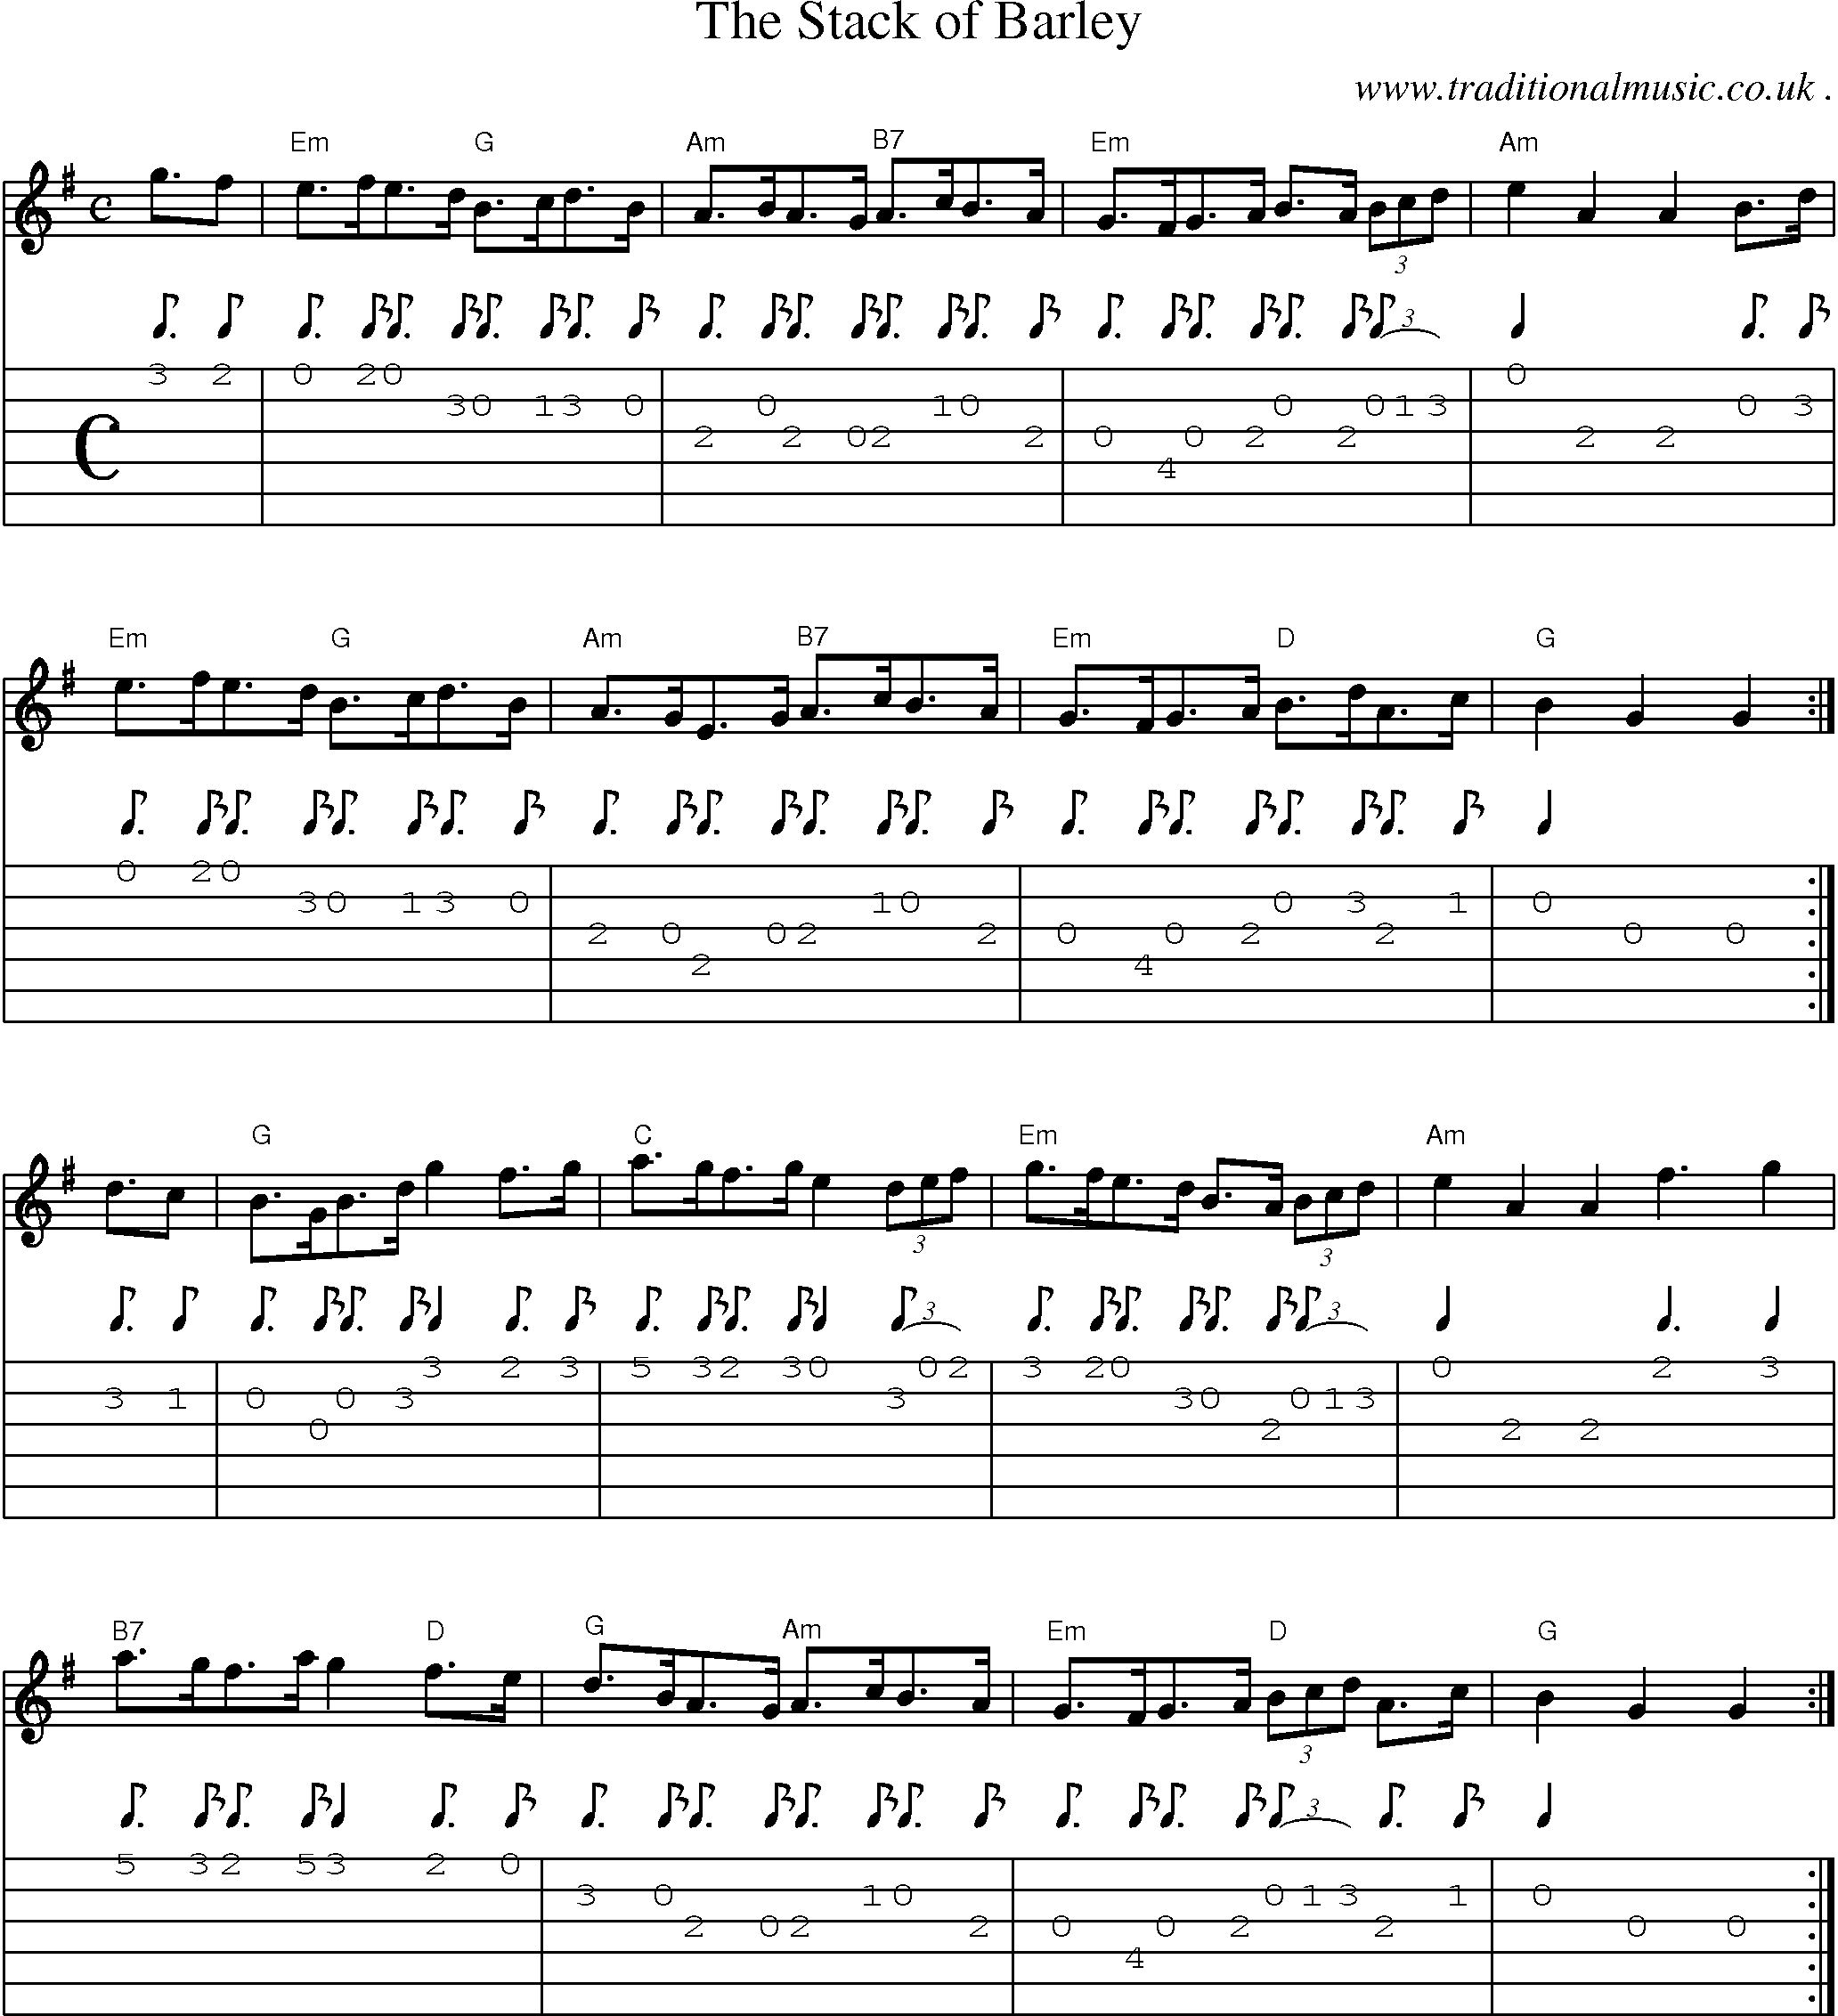 Music Score and Guitar Tabs for The Stack Of Barley